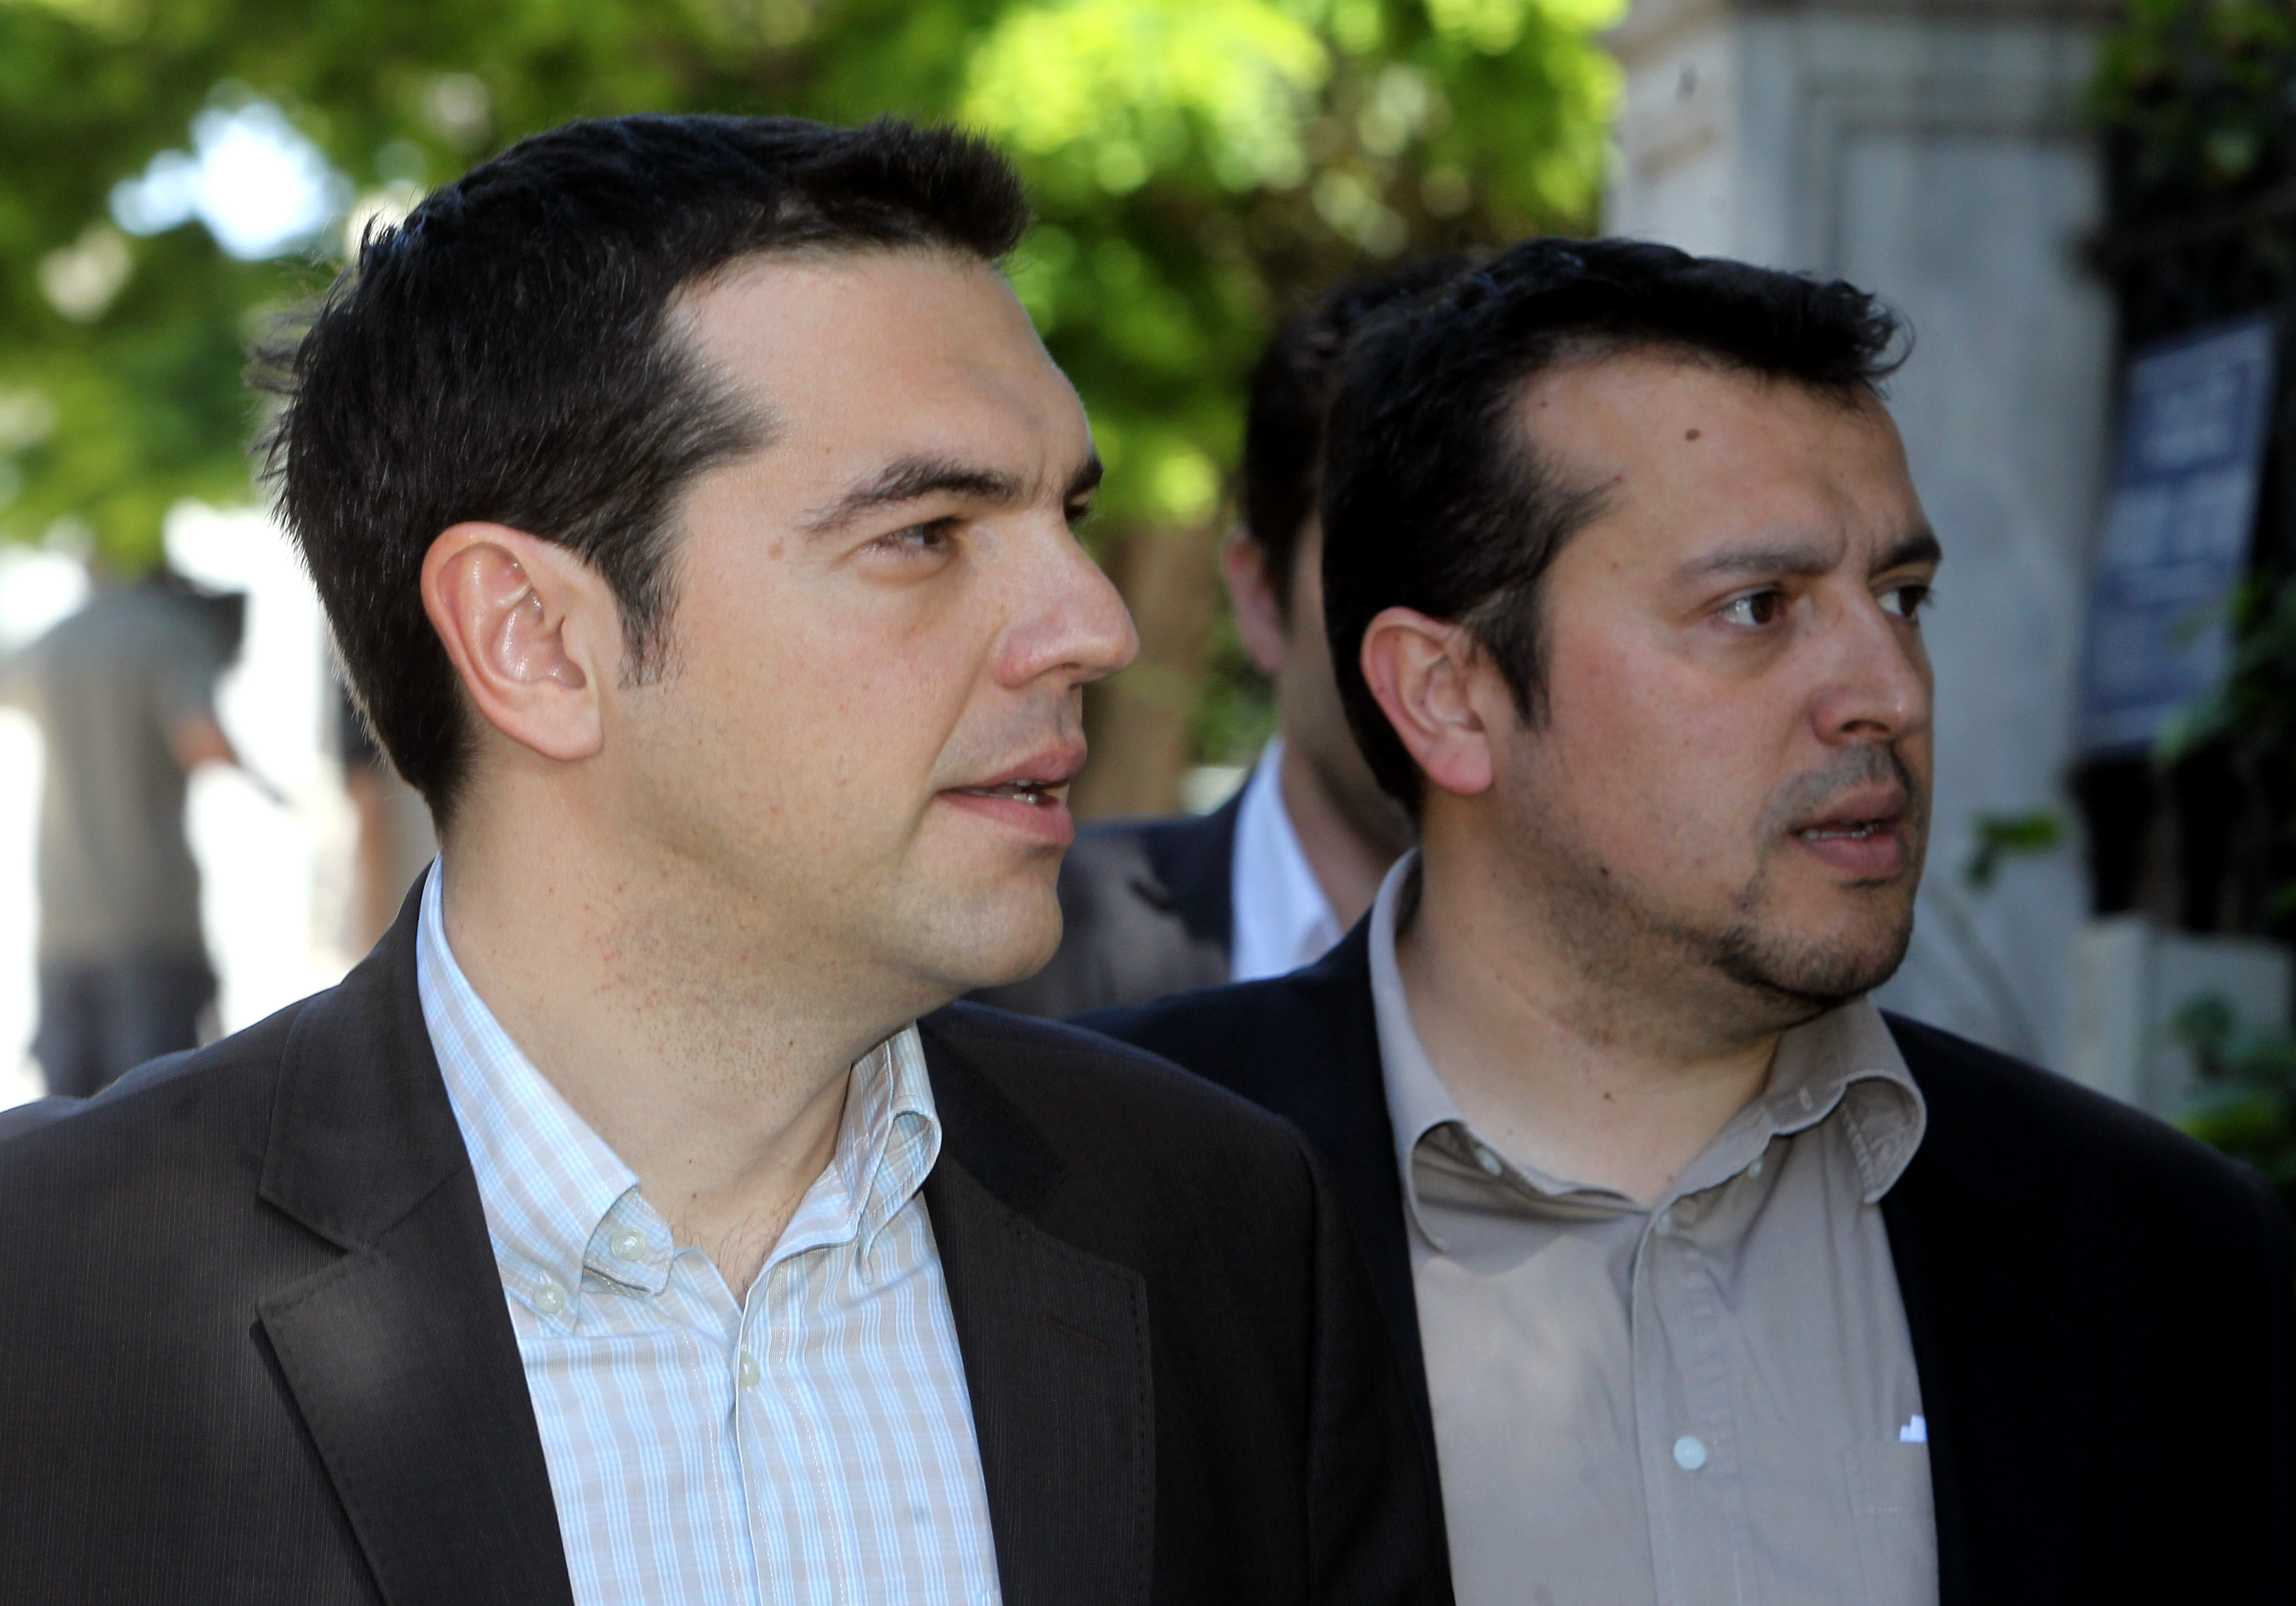 SYRIZA to “honor loan agreement, but with different terms”